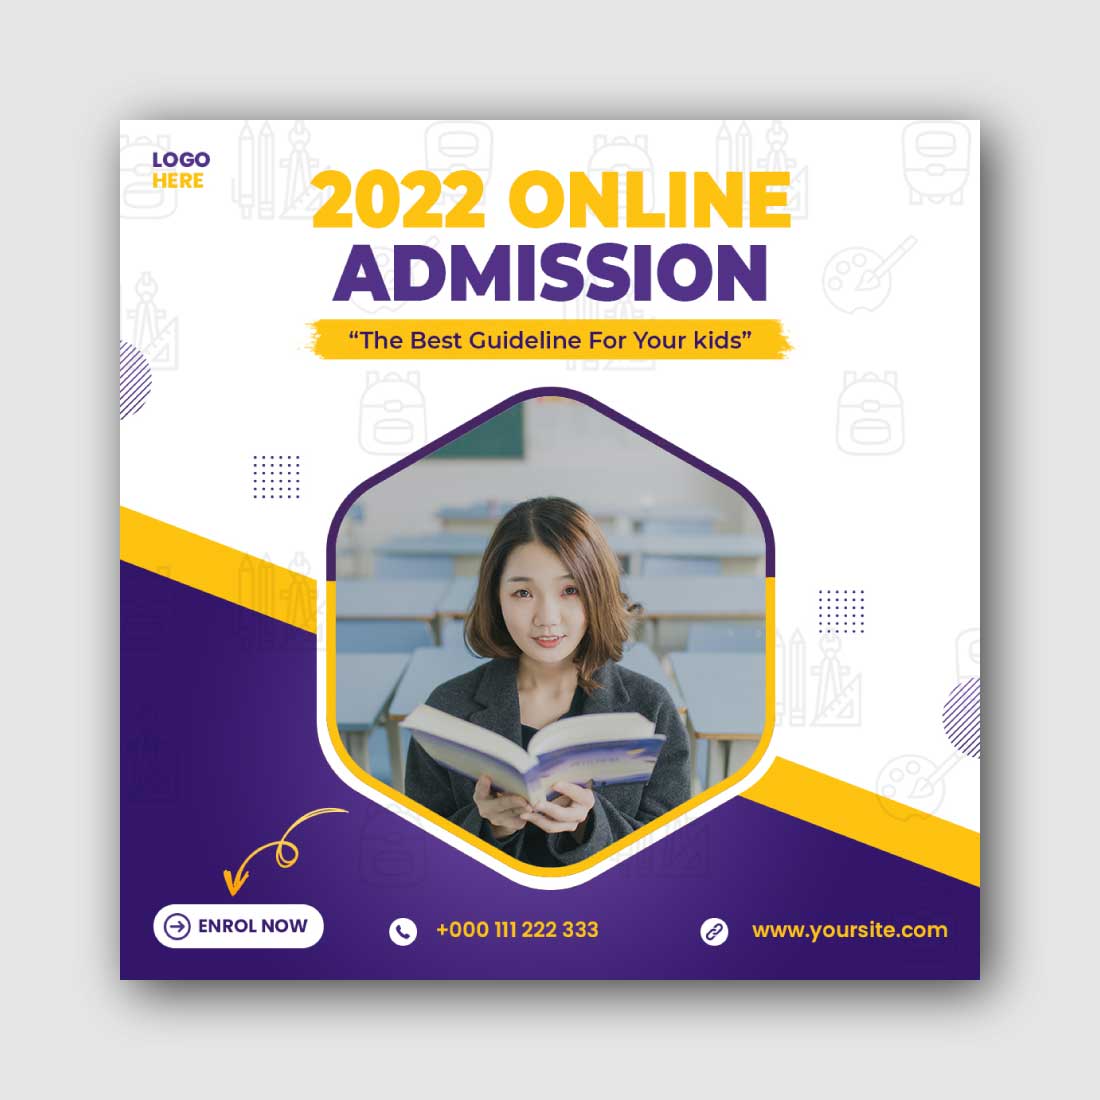 School admission Social Media Instagram Post Template cover image.